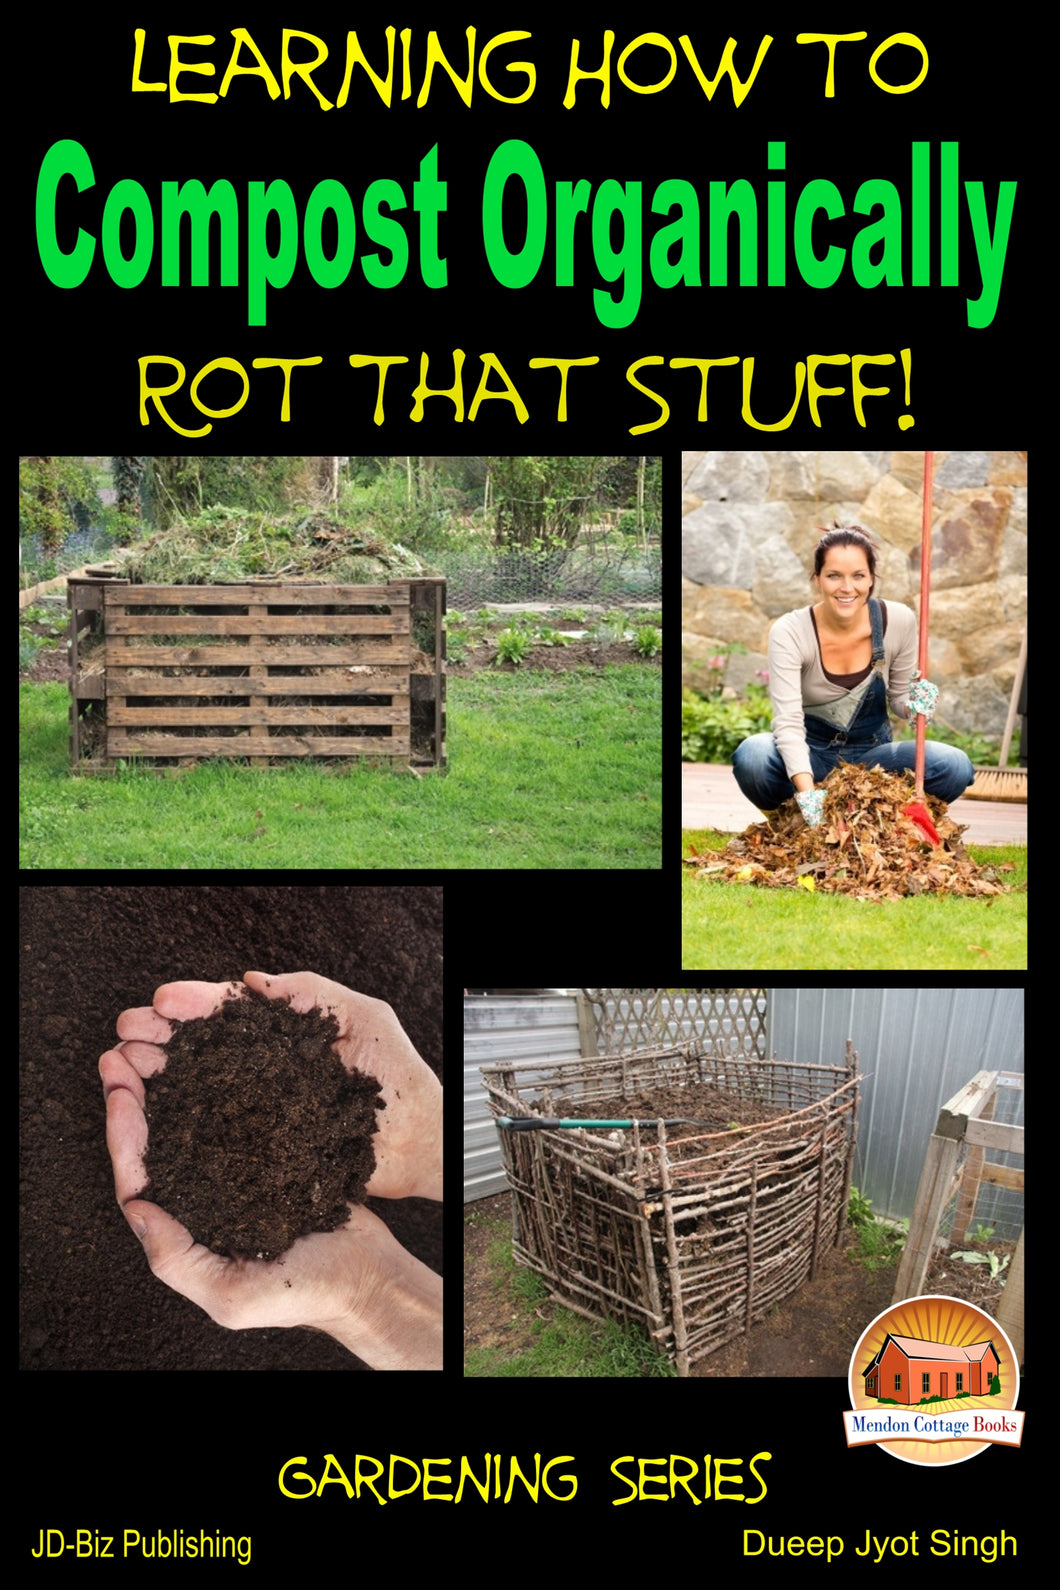 Rot That Stuff! - Learning How to Compost Organically